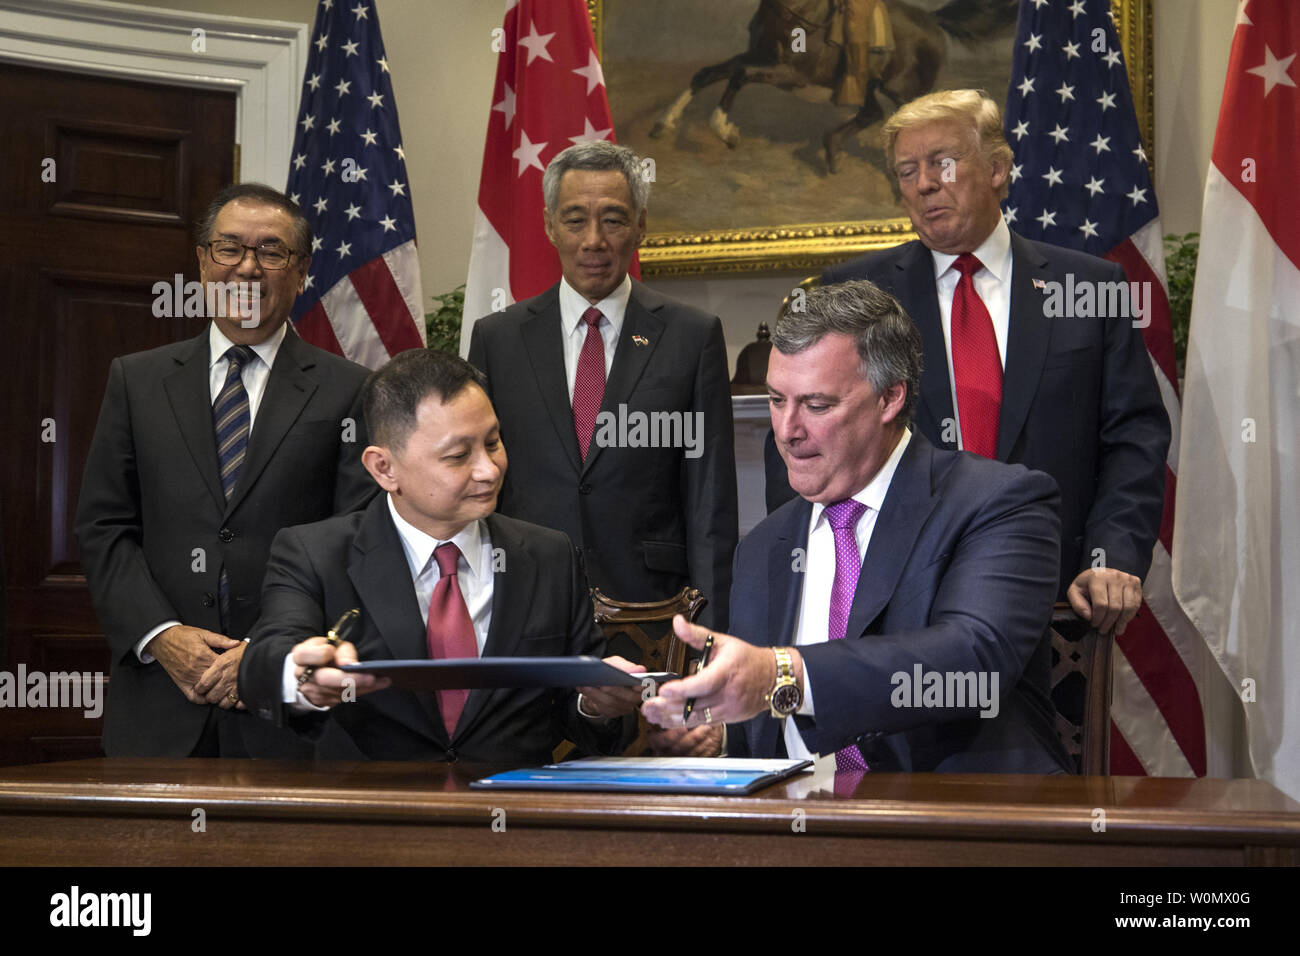 Boeing Executive Vice President Kevin McAllister (R) and CEO of Singapore Airlines Goh Choon Phong (C-L) along US President Donald Trump (C-R) and Lee Hsien Loong (C) of Singapore attend a signing ceremony for airplane sales in the Roosevelt Room at the White House in Washington, DC, on October 23, 2017. The meeting comes less than two weeks before President Trump makes an extended trip to the Asia-Pacific region. . Photo by Jim Louis Scalzo/UPI Stock Photo